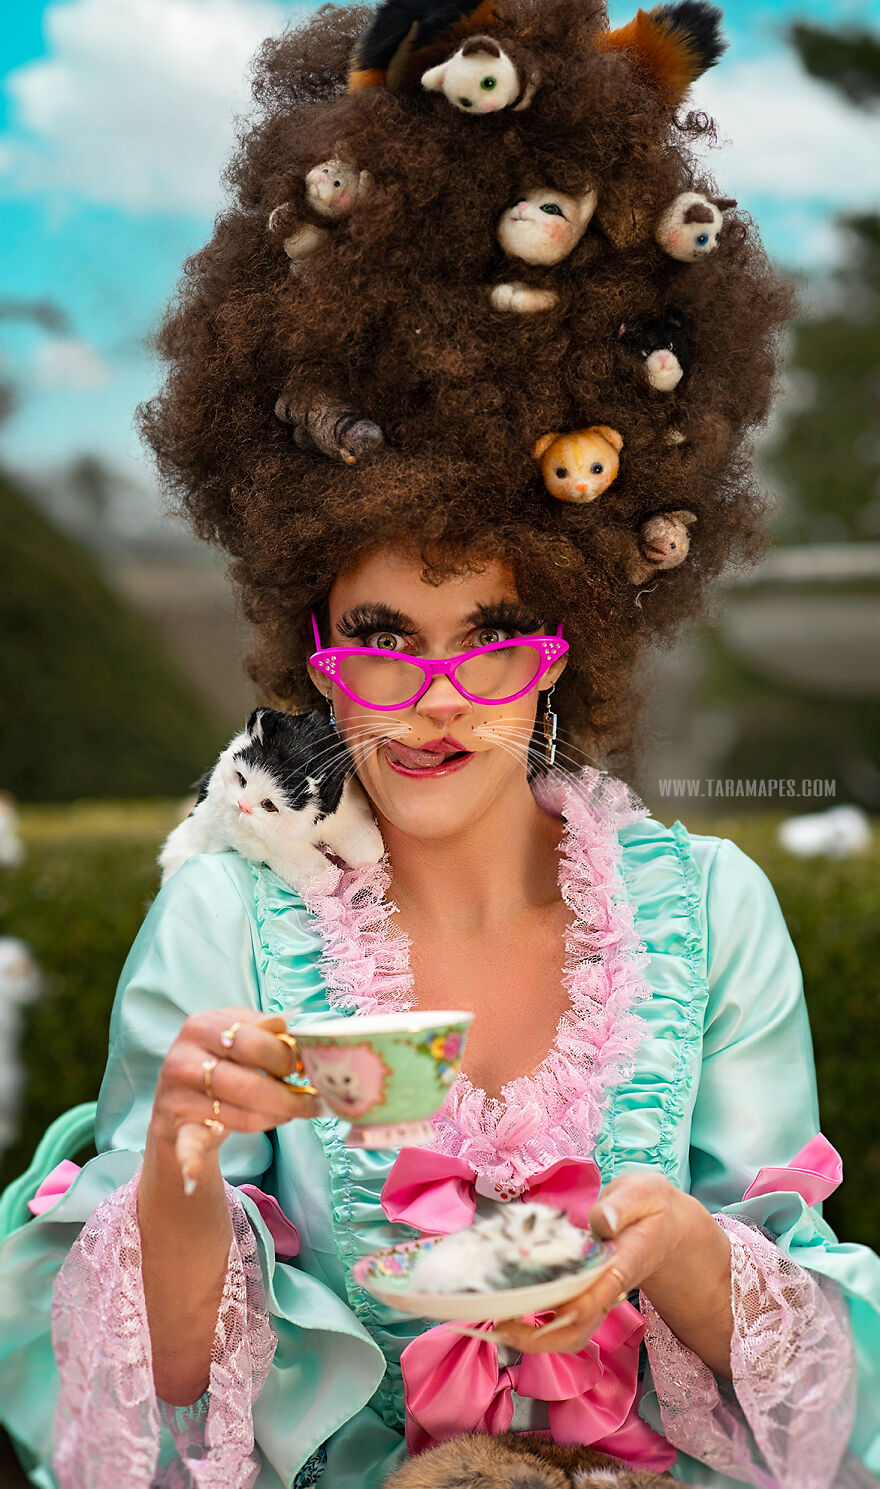 The Cat Lady: I Created A Themed Photoshoot Representing What A 'Real' Cat Lady Would Look Like If She Started To Become What She Loves